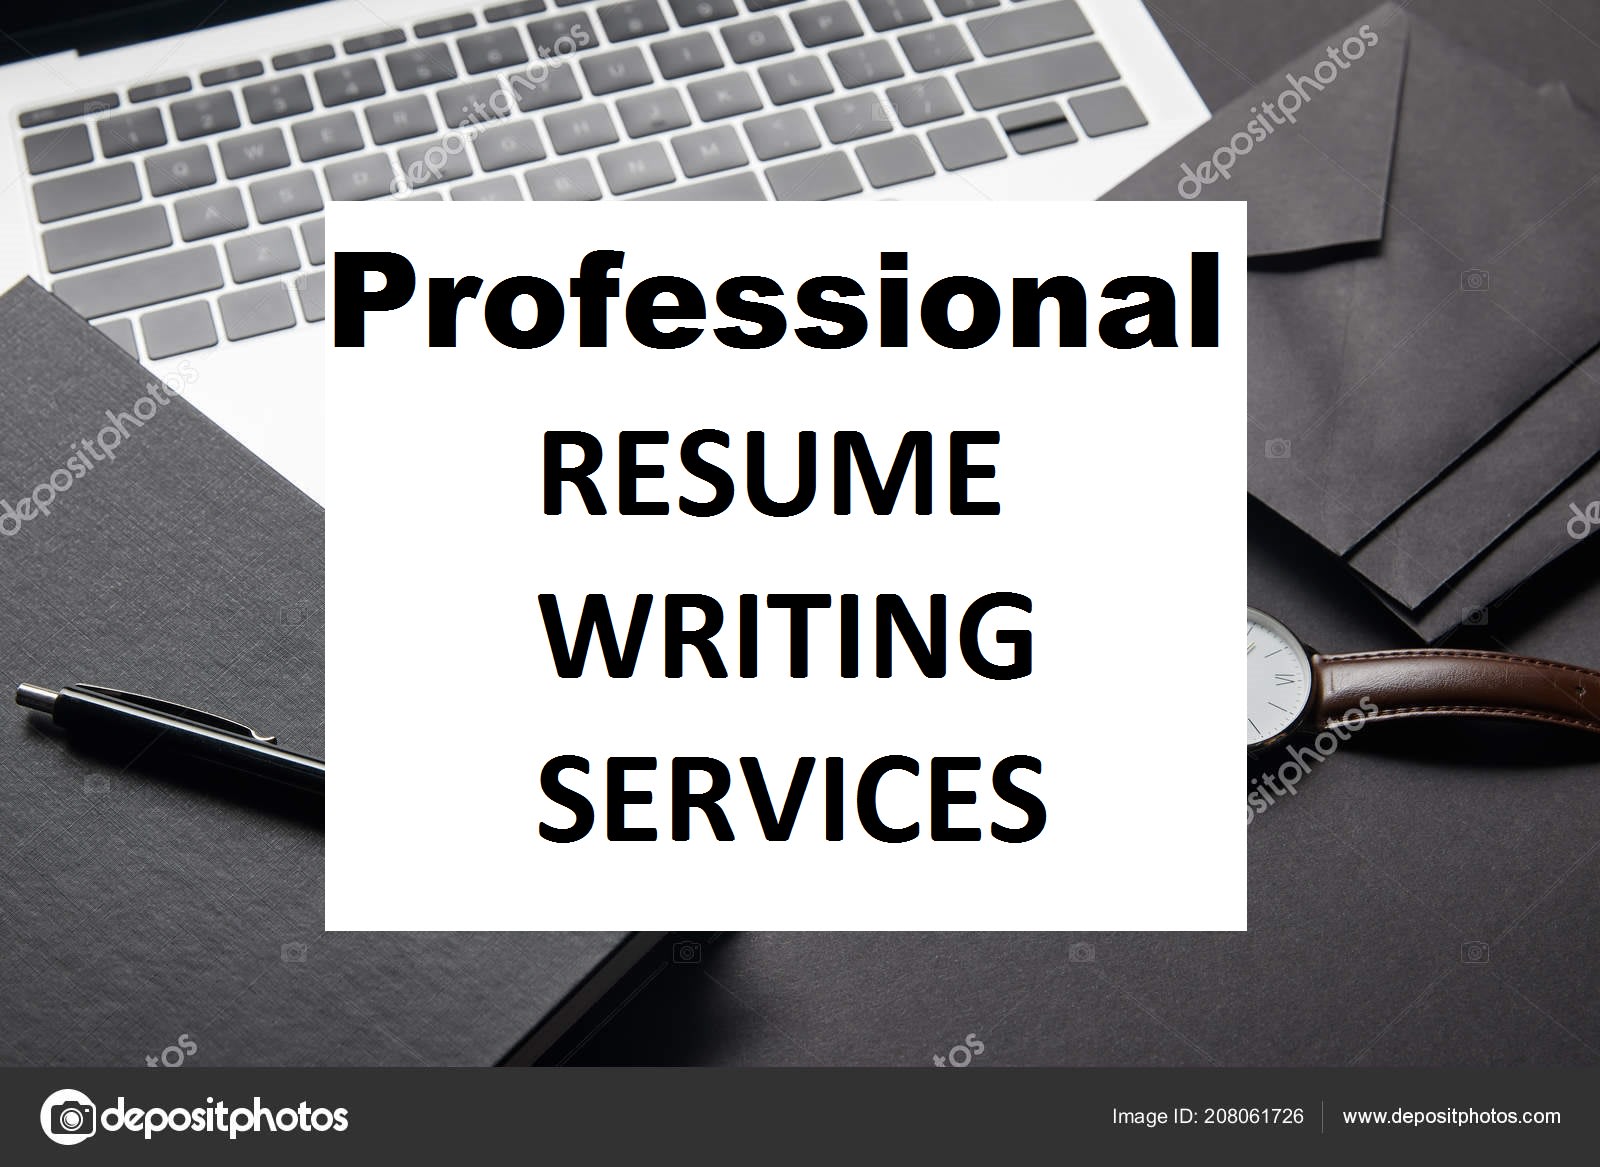 Resume writing services for healthcare professionals